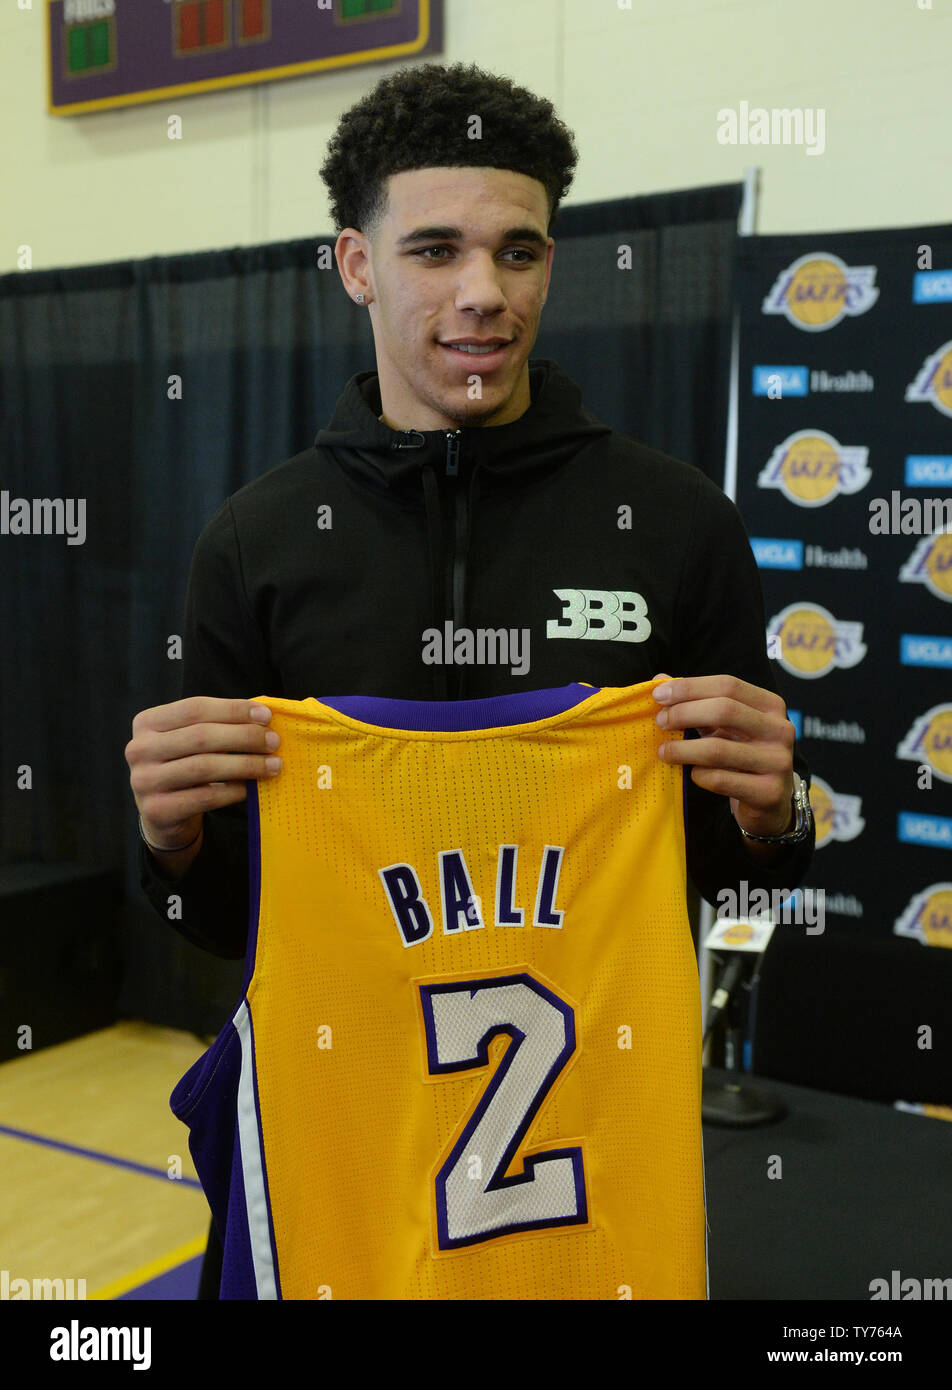 jersey number 2 lakers